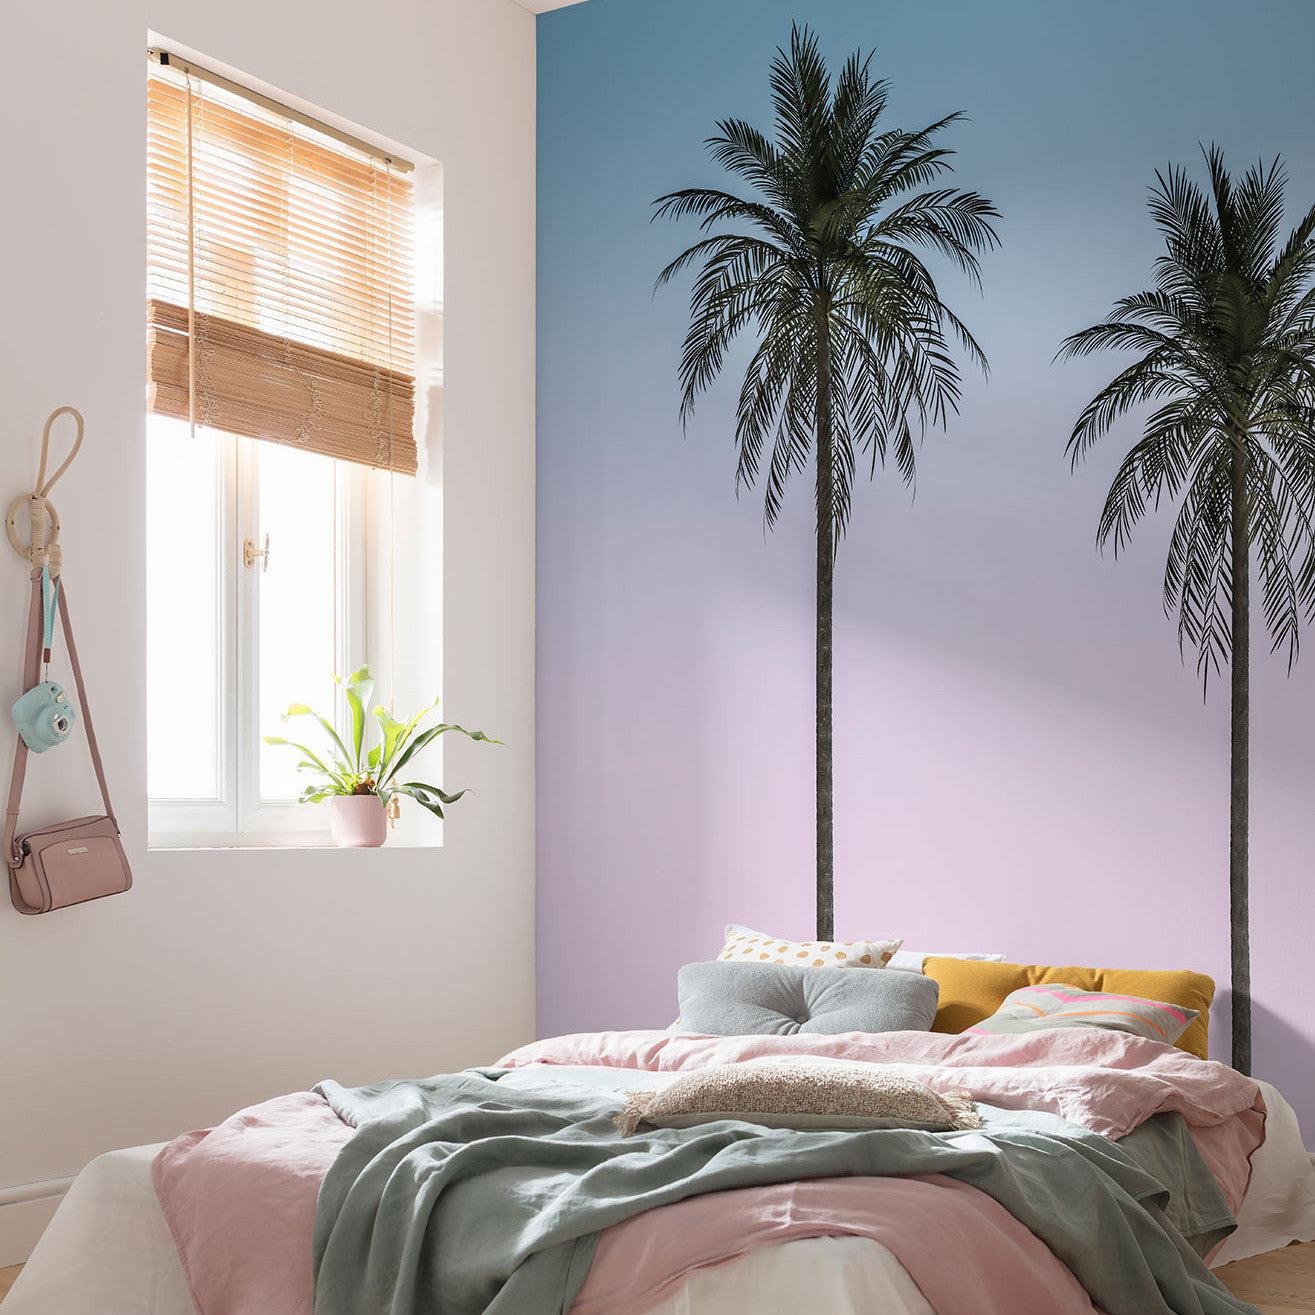 Cali Sunset Wallpaper Mural-Wall Decor-ECO MURALS, JUNGLE WALLPAPER, LANDSCAPE WALLPAPERS, MURALS, MURALS / WALLPAPERS, NON-WOVEN WALLPAPER, PALM WALLPAPER, TROPICAL MURAL-Forest Homes-Nature inspired decor-Nature decor